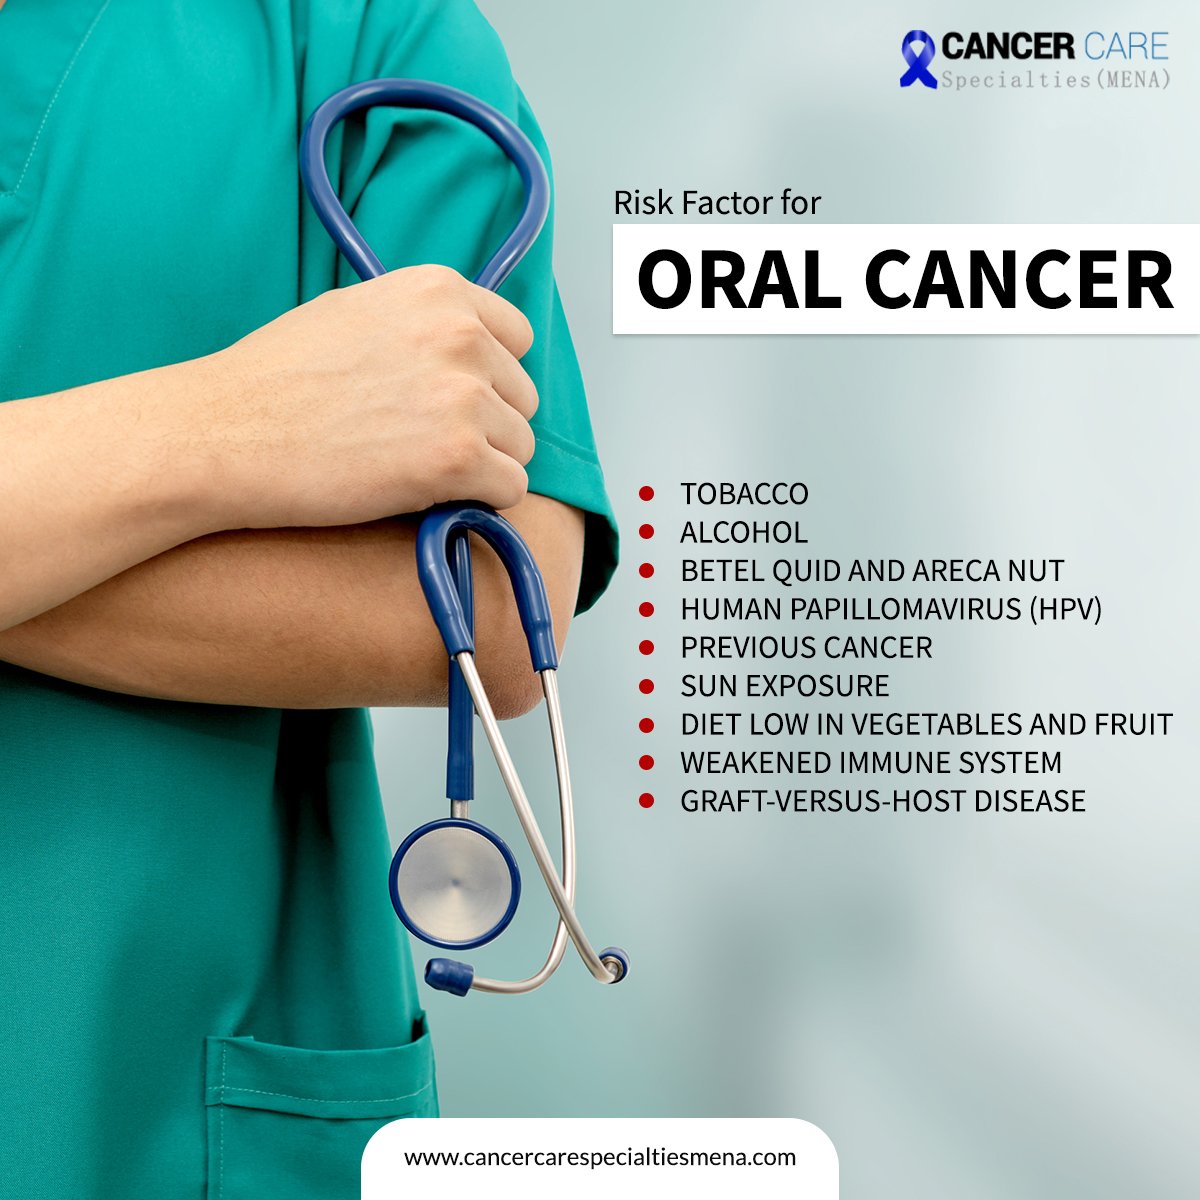 Risk factors for oral cancer...

Are you an alcoholic? If yes, think about it again !!

#oralcancer #riskfctors #cancersymptoms #cancercare #cancerdubai #dubaihospital #hospitalindubai #bestcancerhospital #dubai #uae #doctors #surgeons